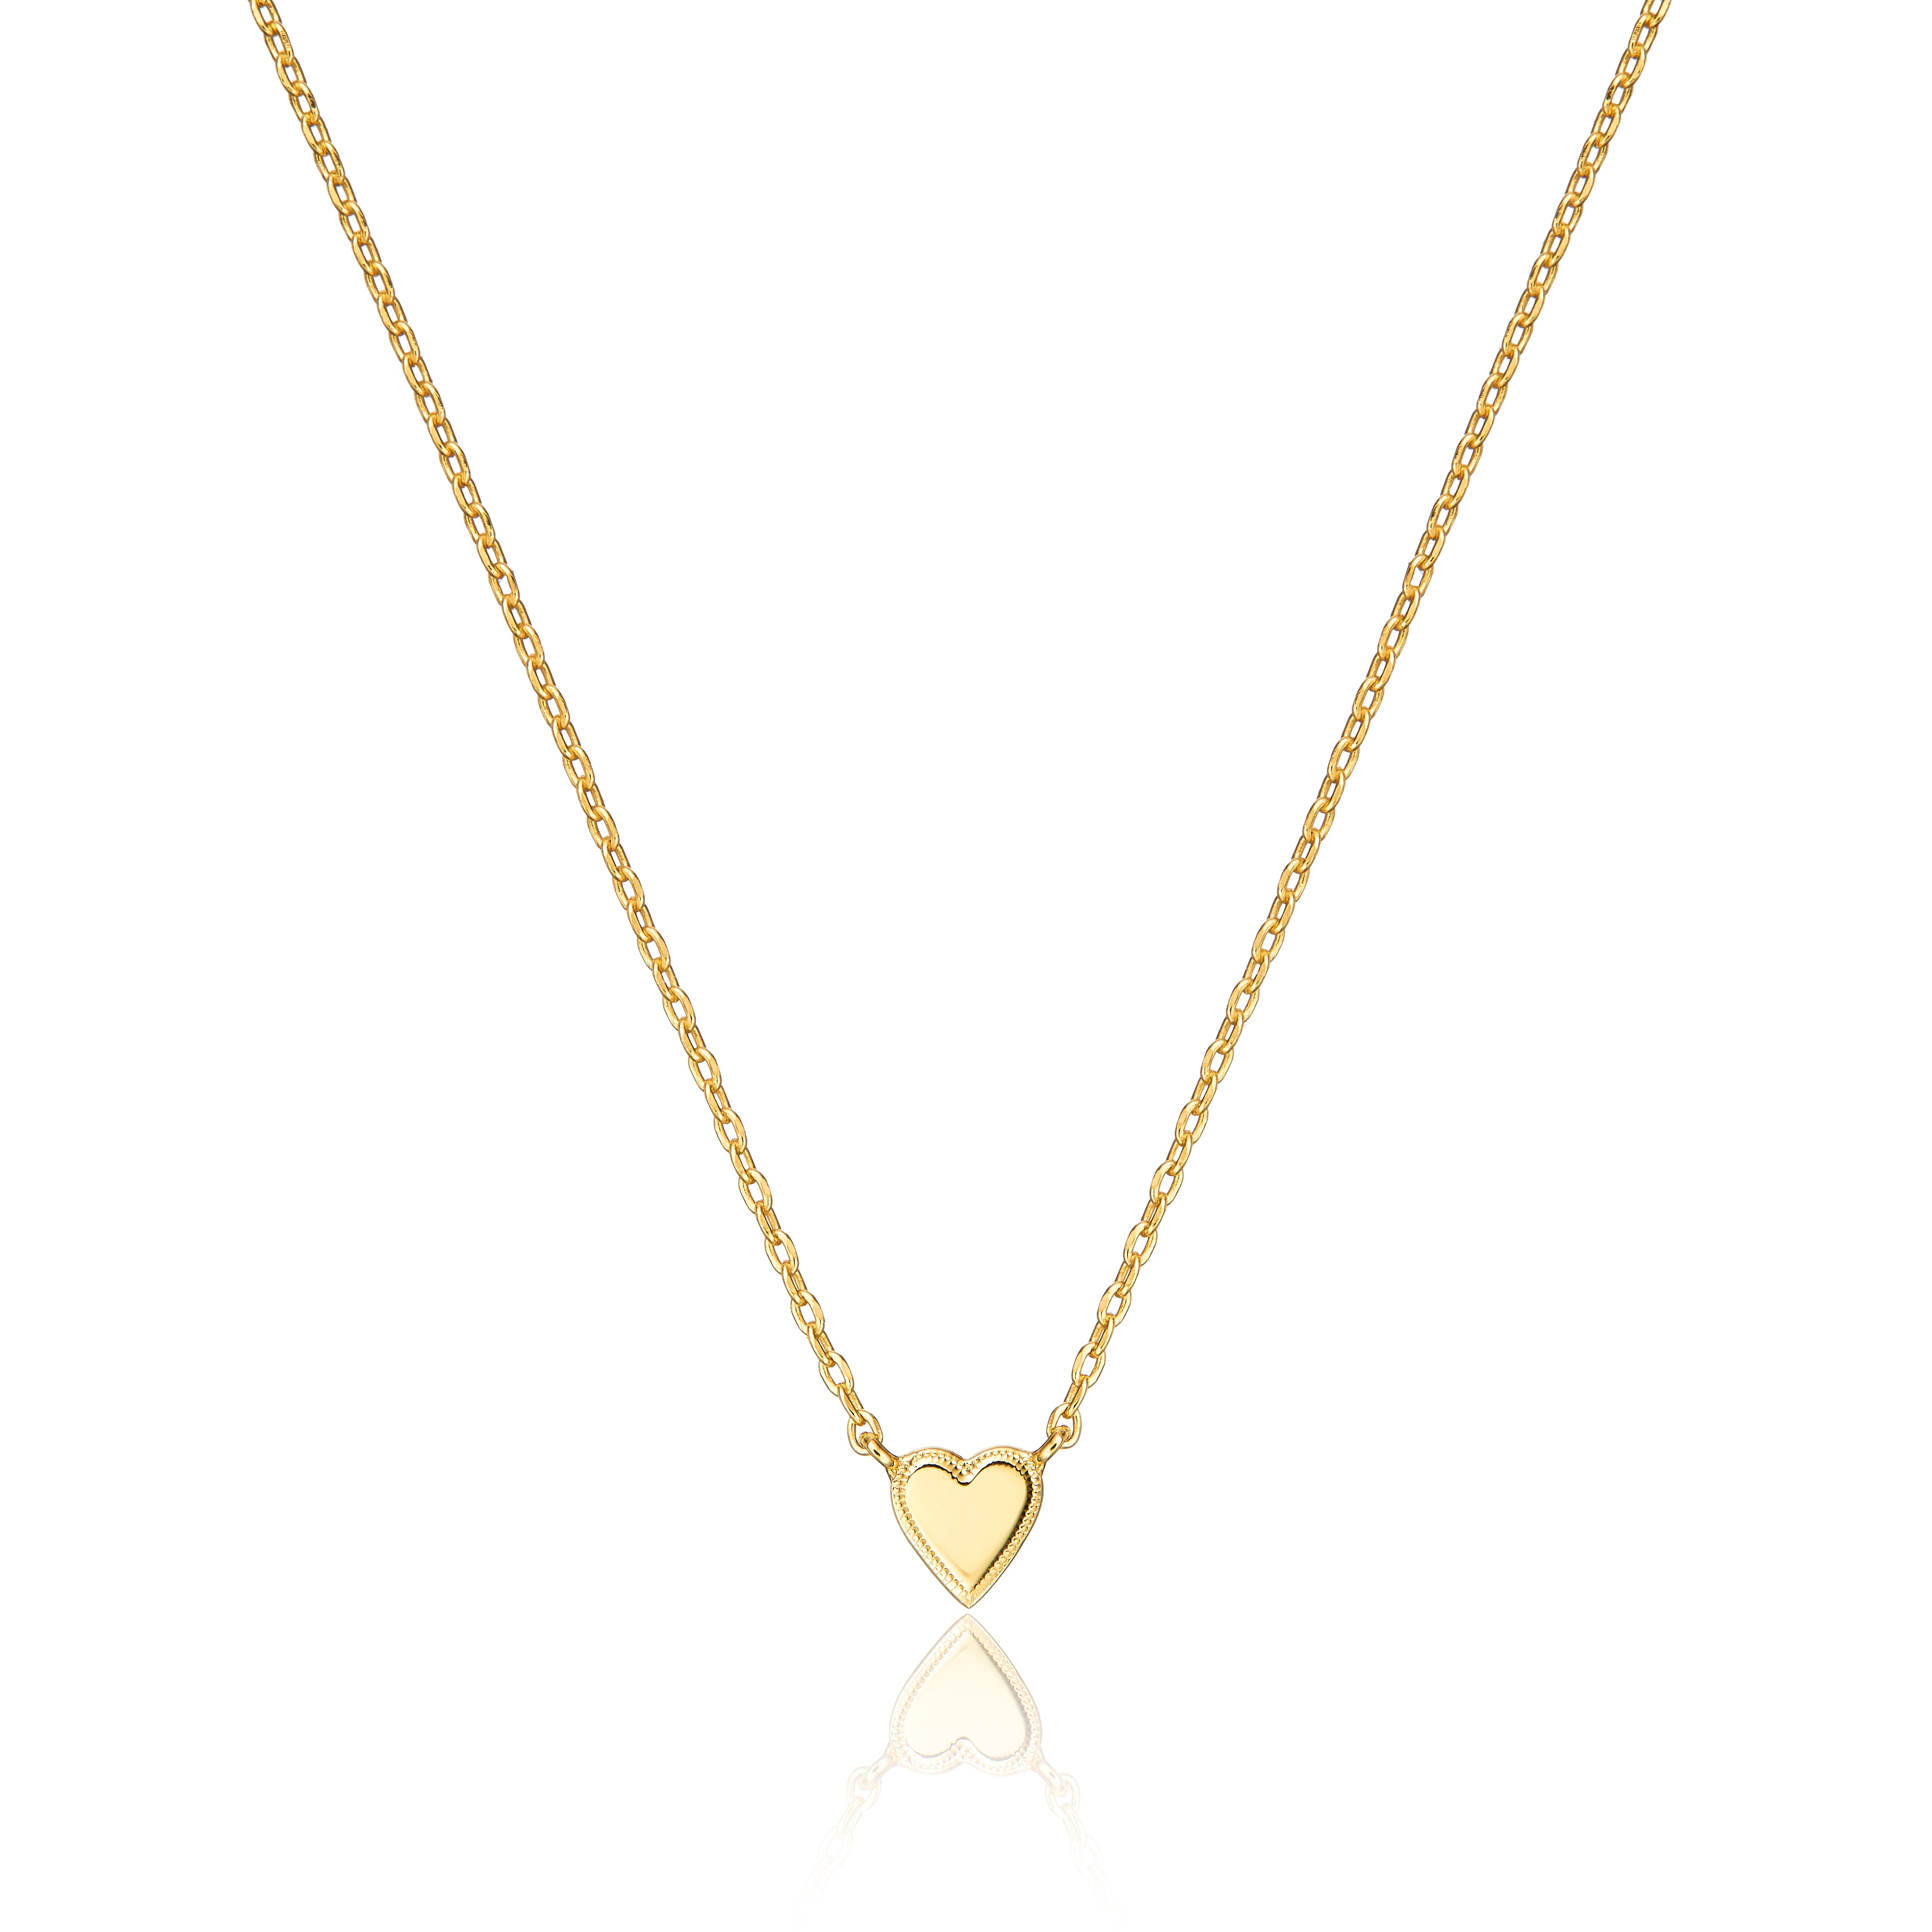 Gold tiny heart necklace on a white background